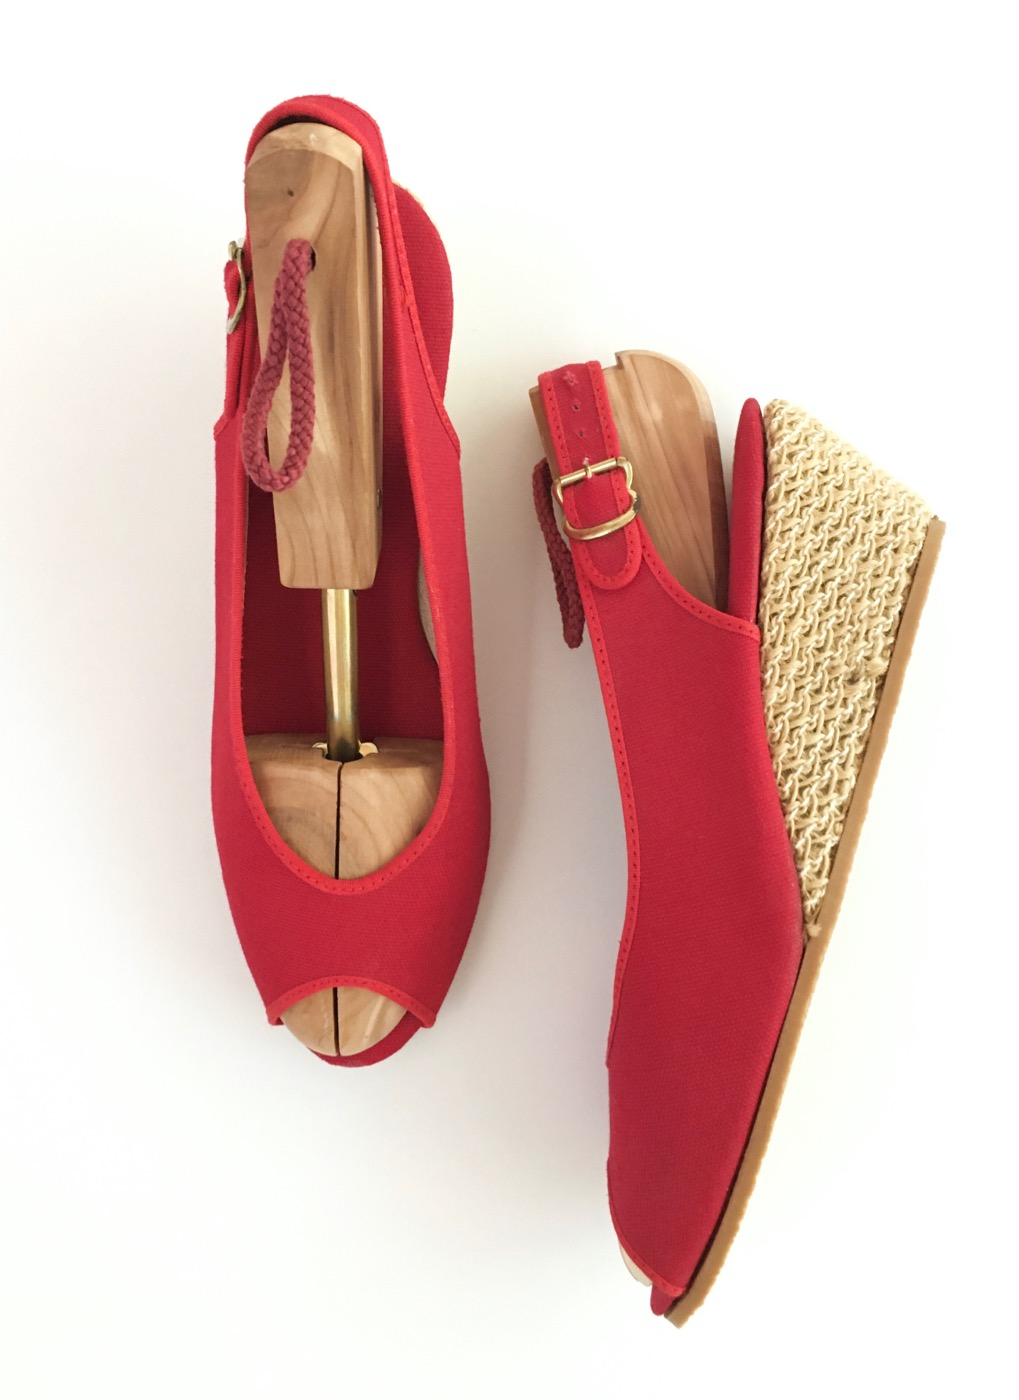 1970s red espadrille shoes sandals with woven straw wedges